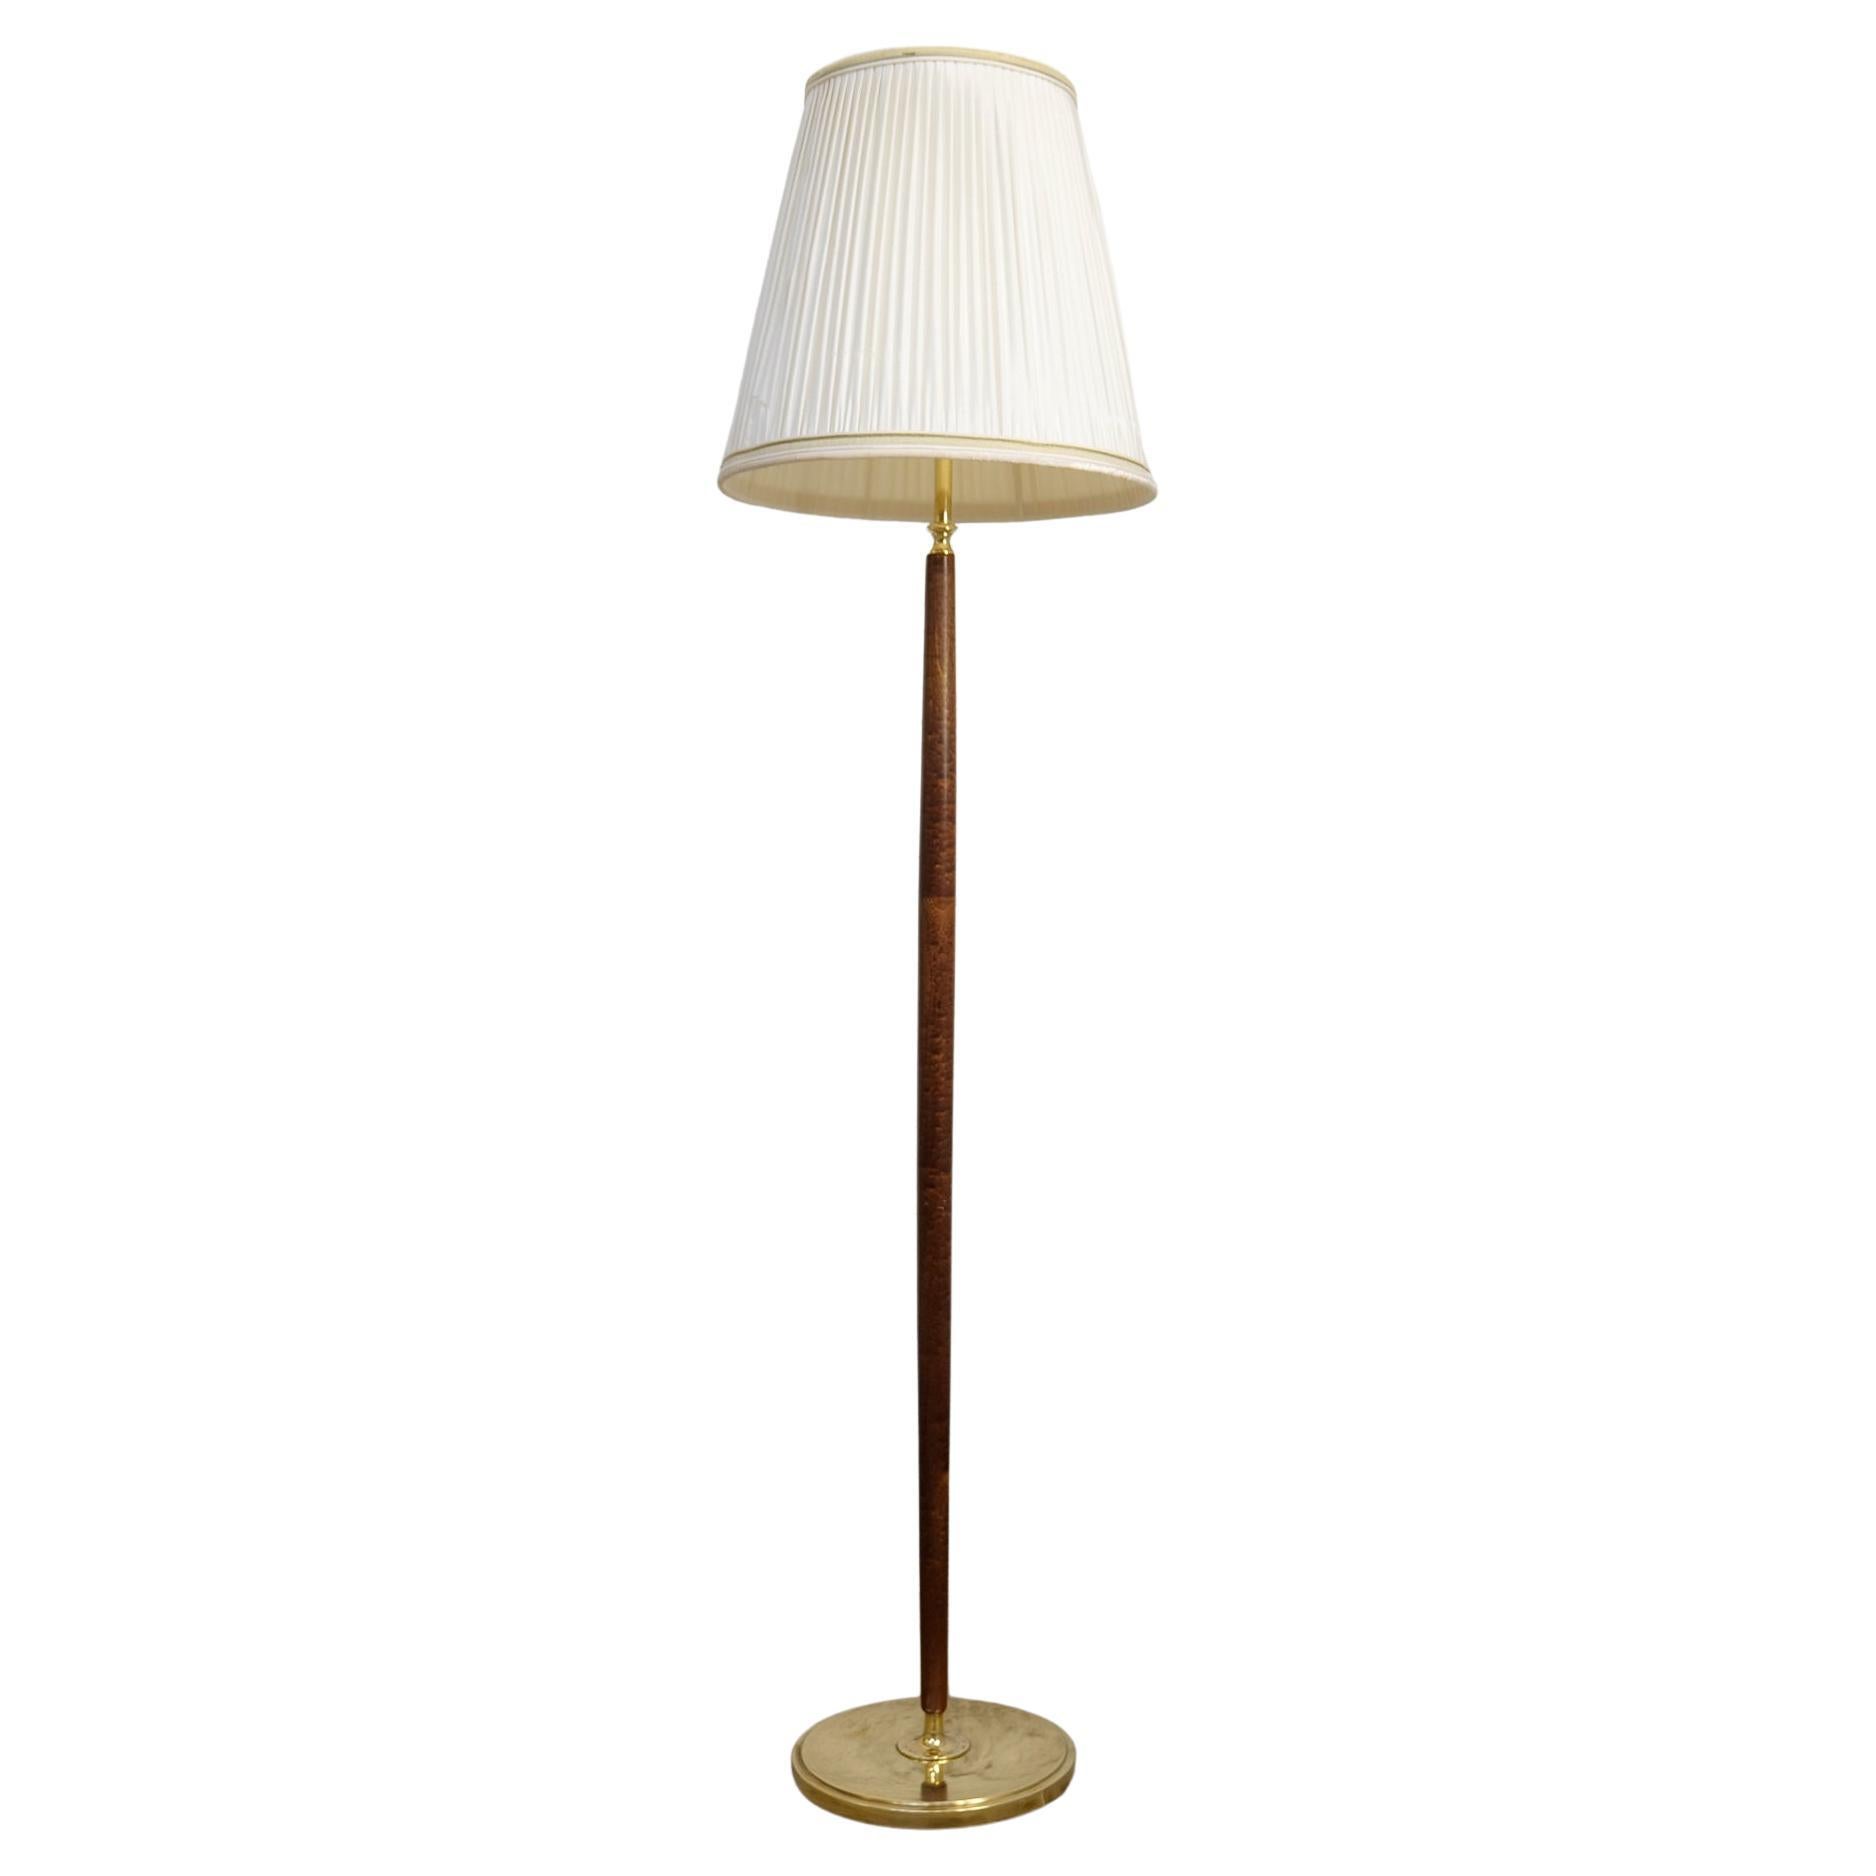 Mid-Century Floor Lamp Brass and Polished Wood Böhlmarks, Sweden, 1940s For Sale